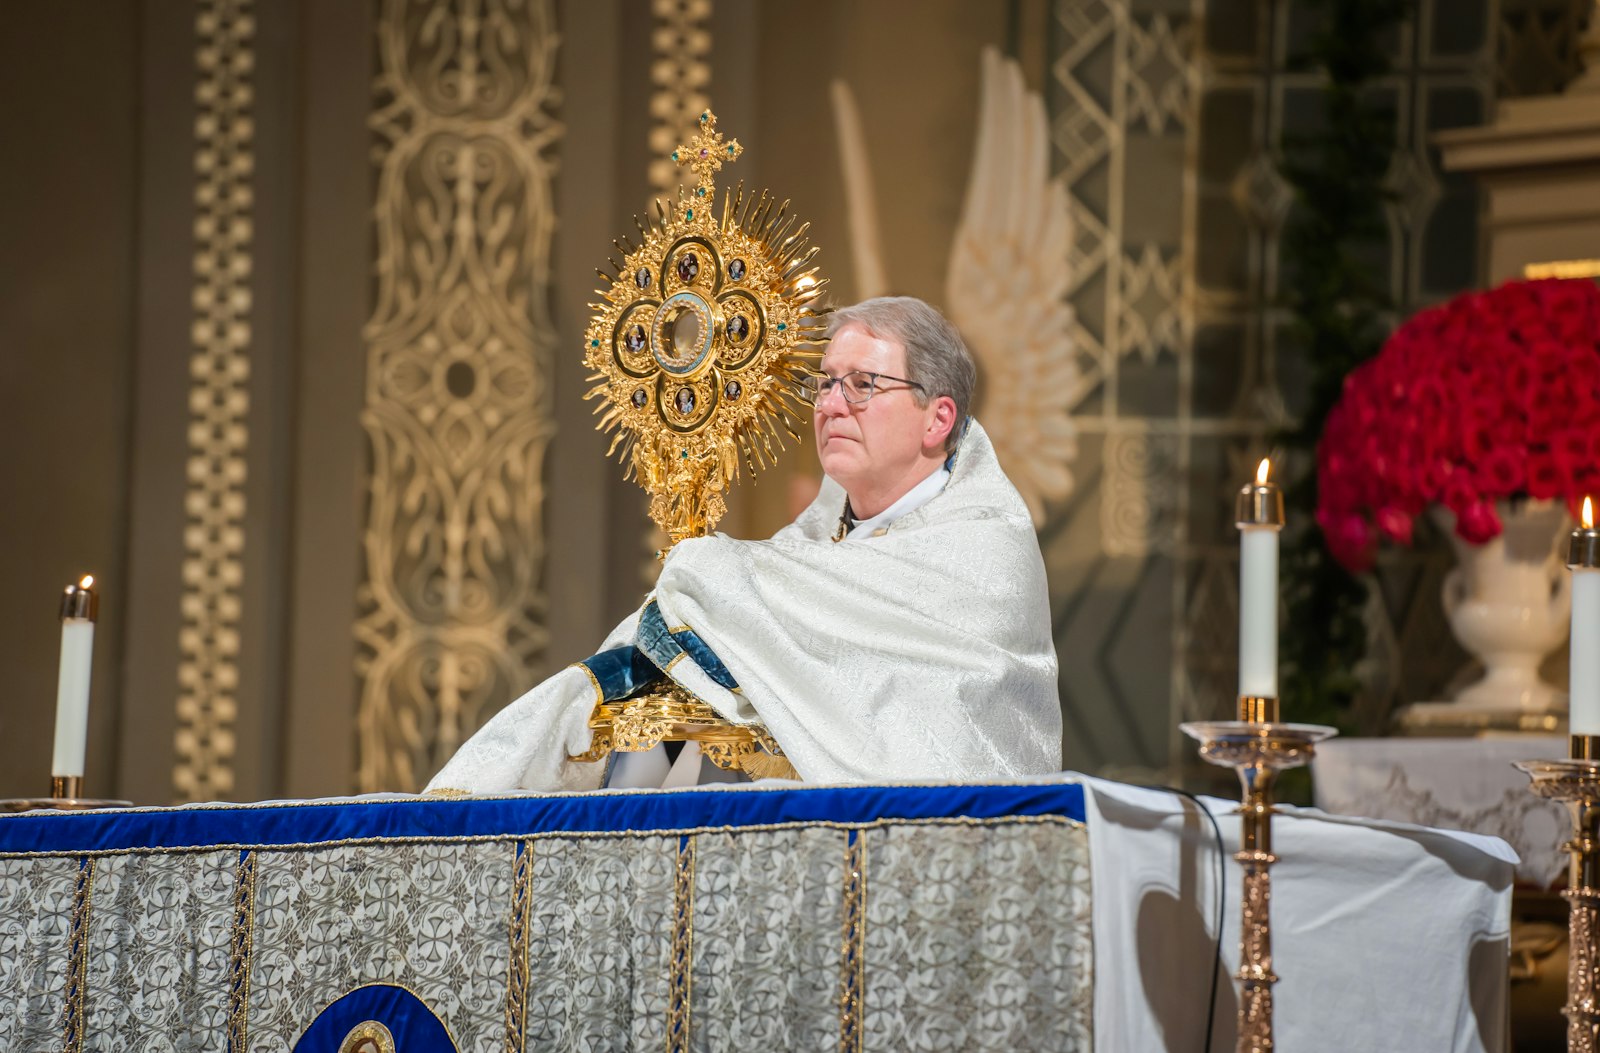 Deacon Mike Van Dyke holds the monstrance containing the Blessed Sacrament during an I AM HERE holy hour Dec. 8 at Old St. Mary's Parish in downtown Detroit's Greektown.